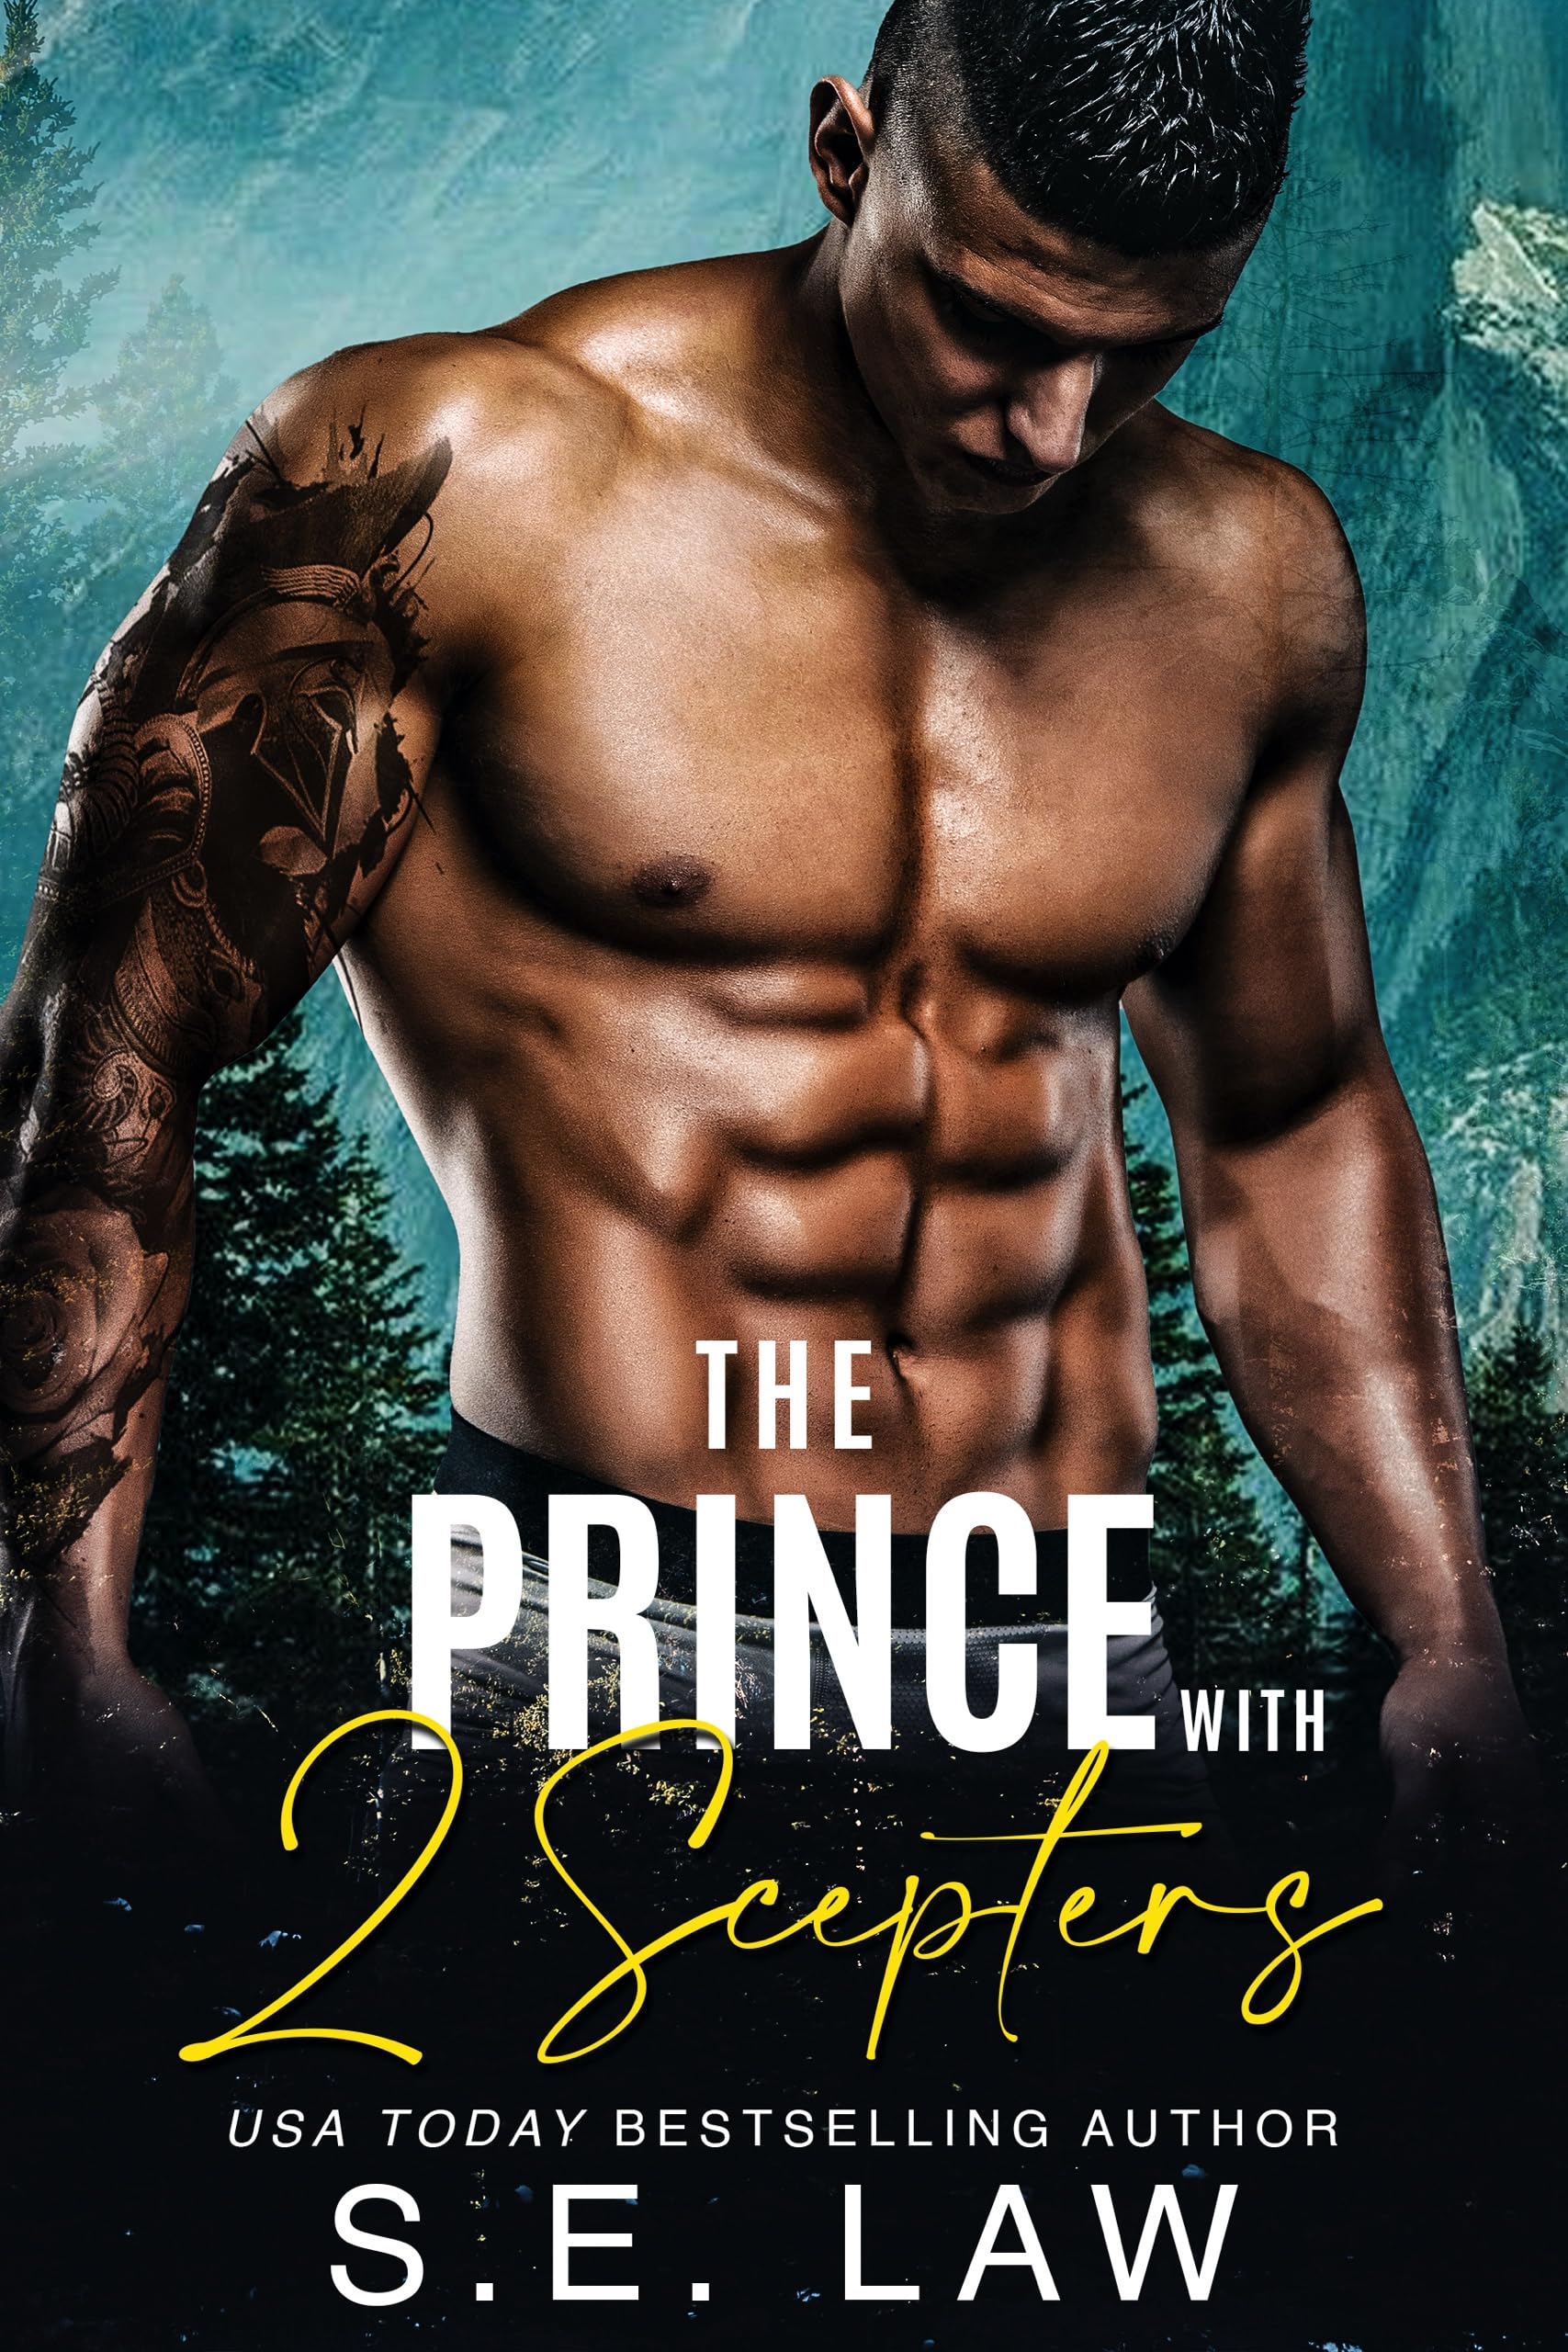 The Prince With 2 Scepters: A Double Appendage Huge Size Romance (The Shape of Love)